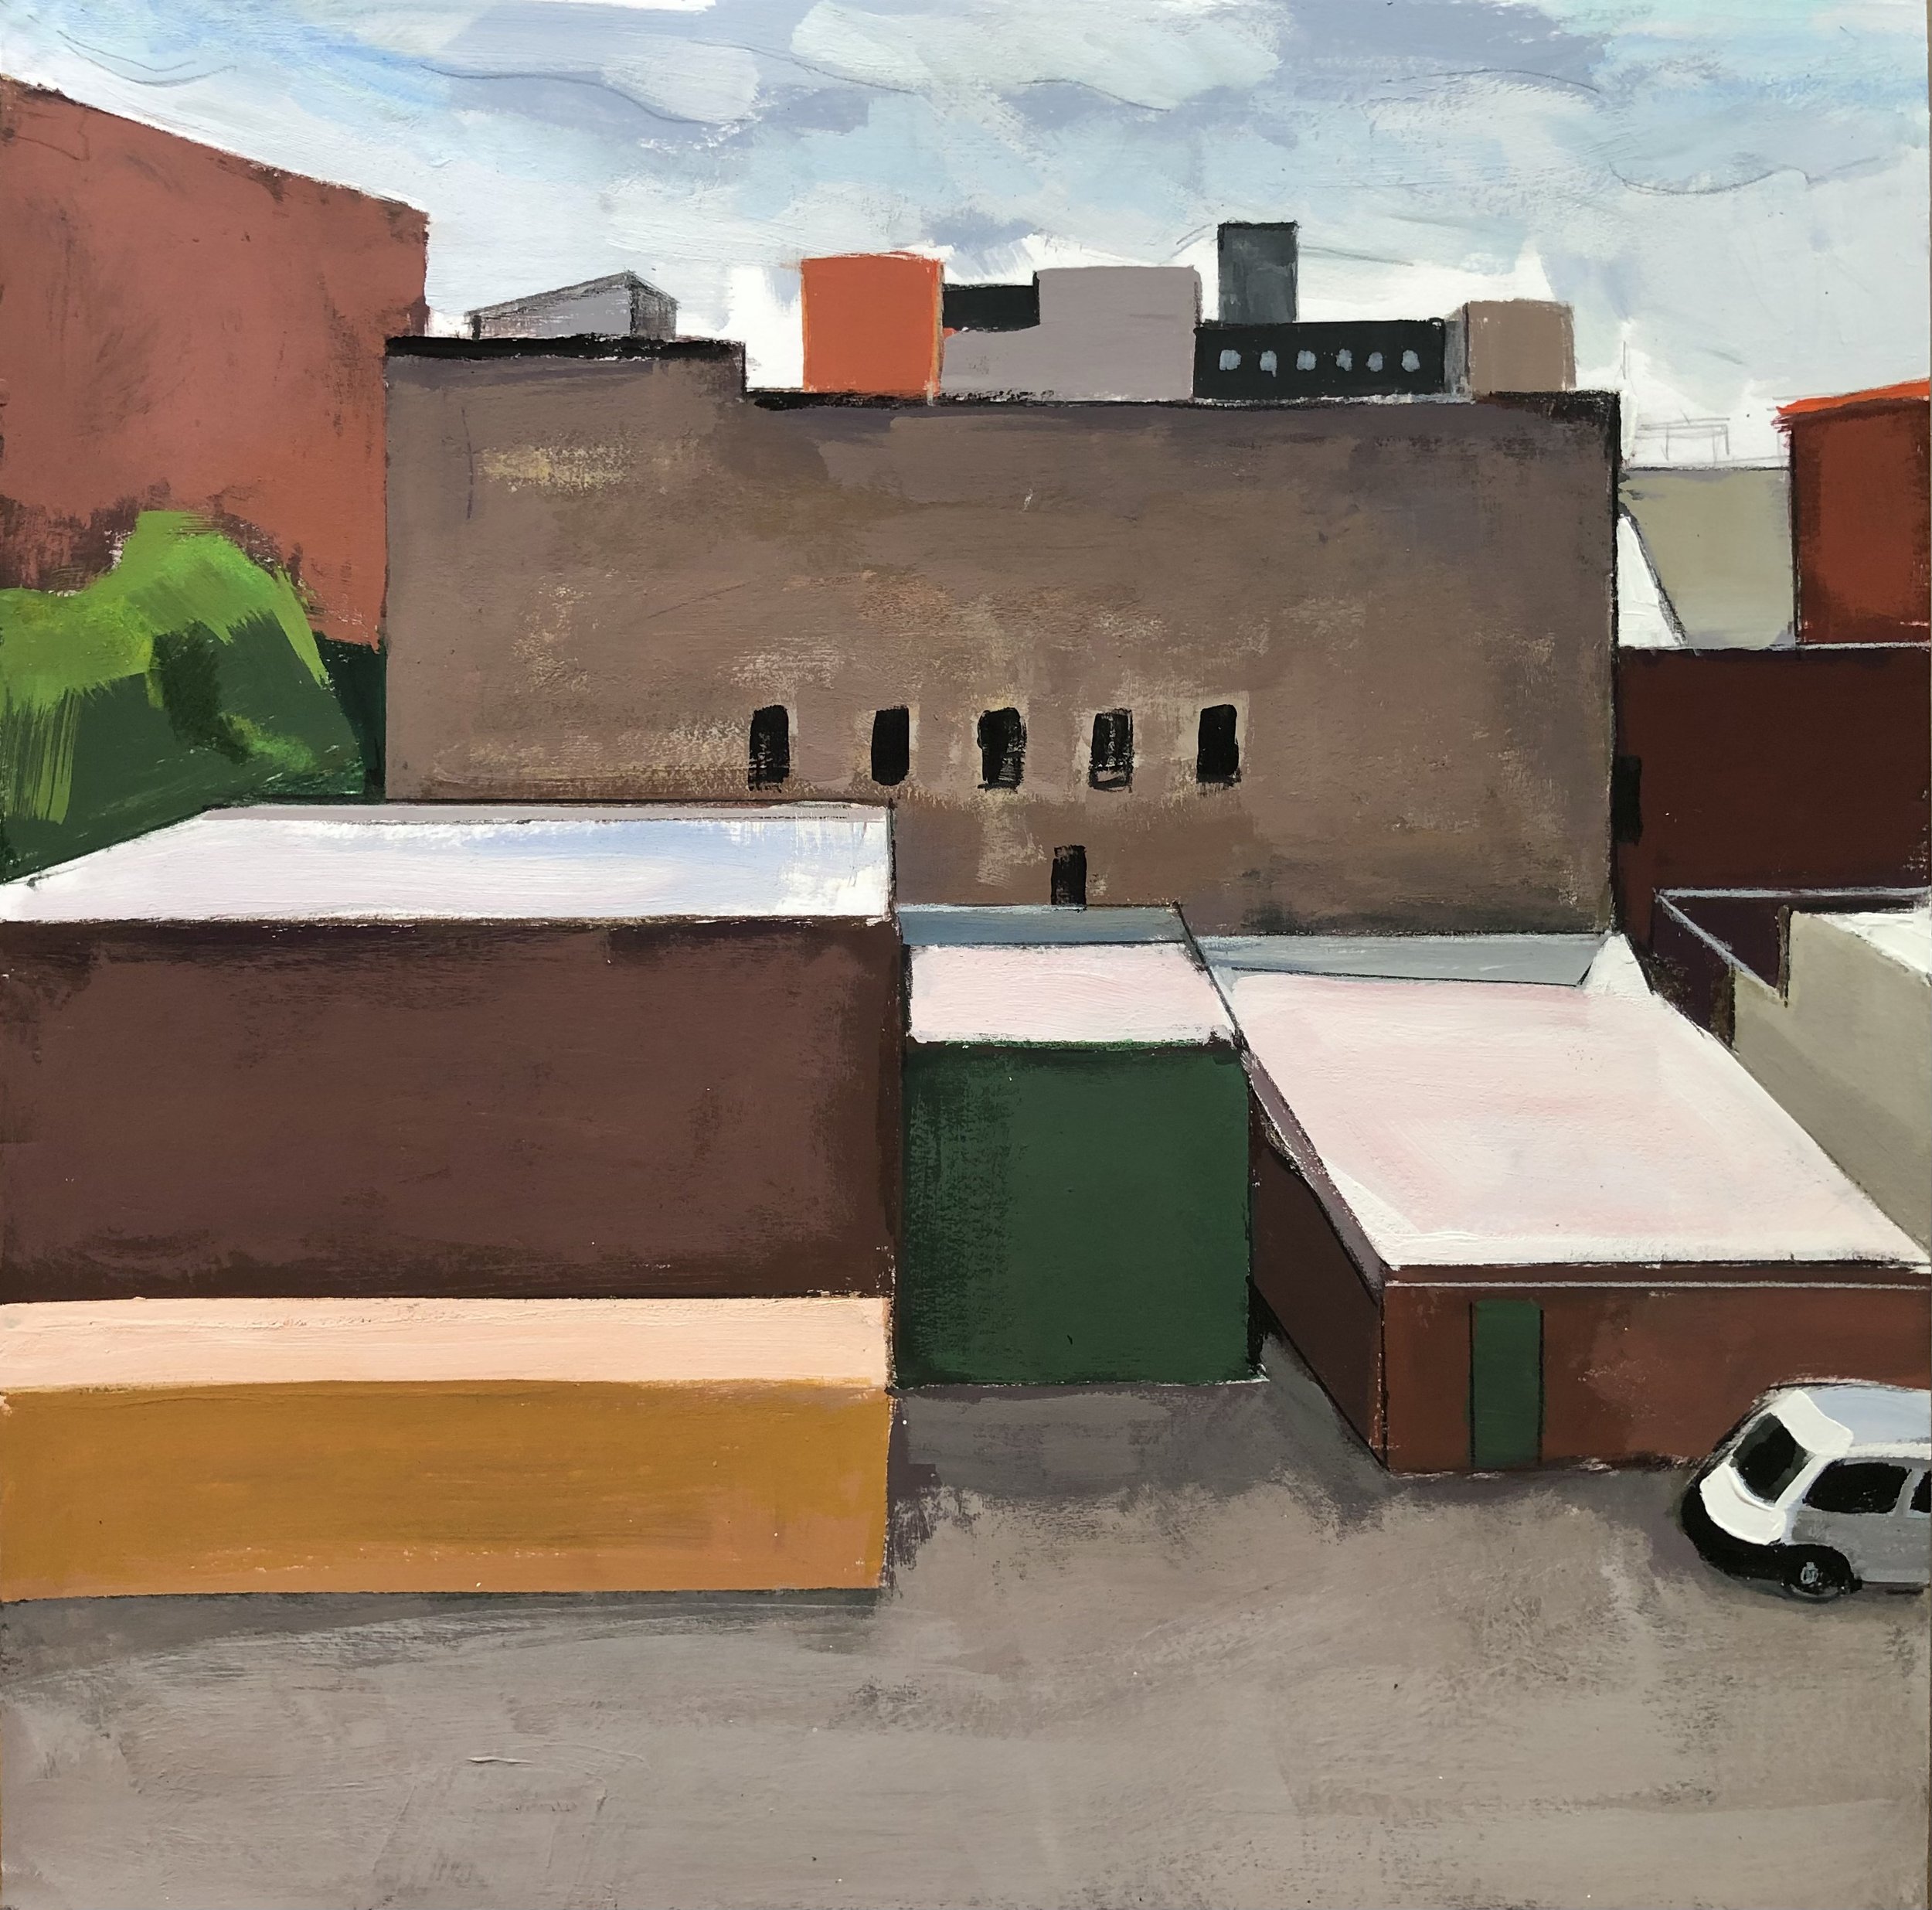    East Harlem Construction Lot with Rooftops II,   gouache, 12 x 12 in, 2022                       